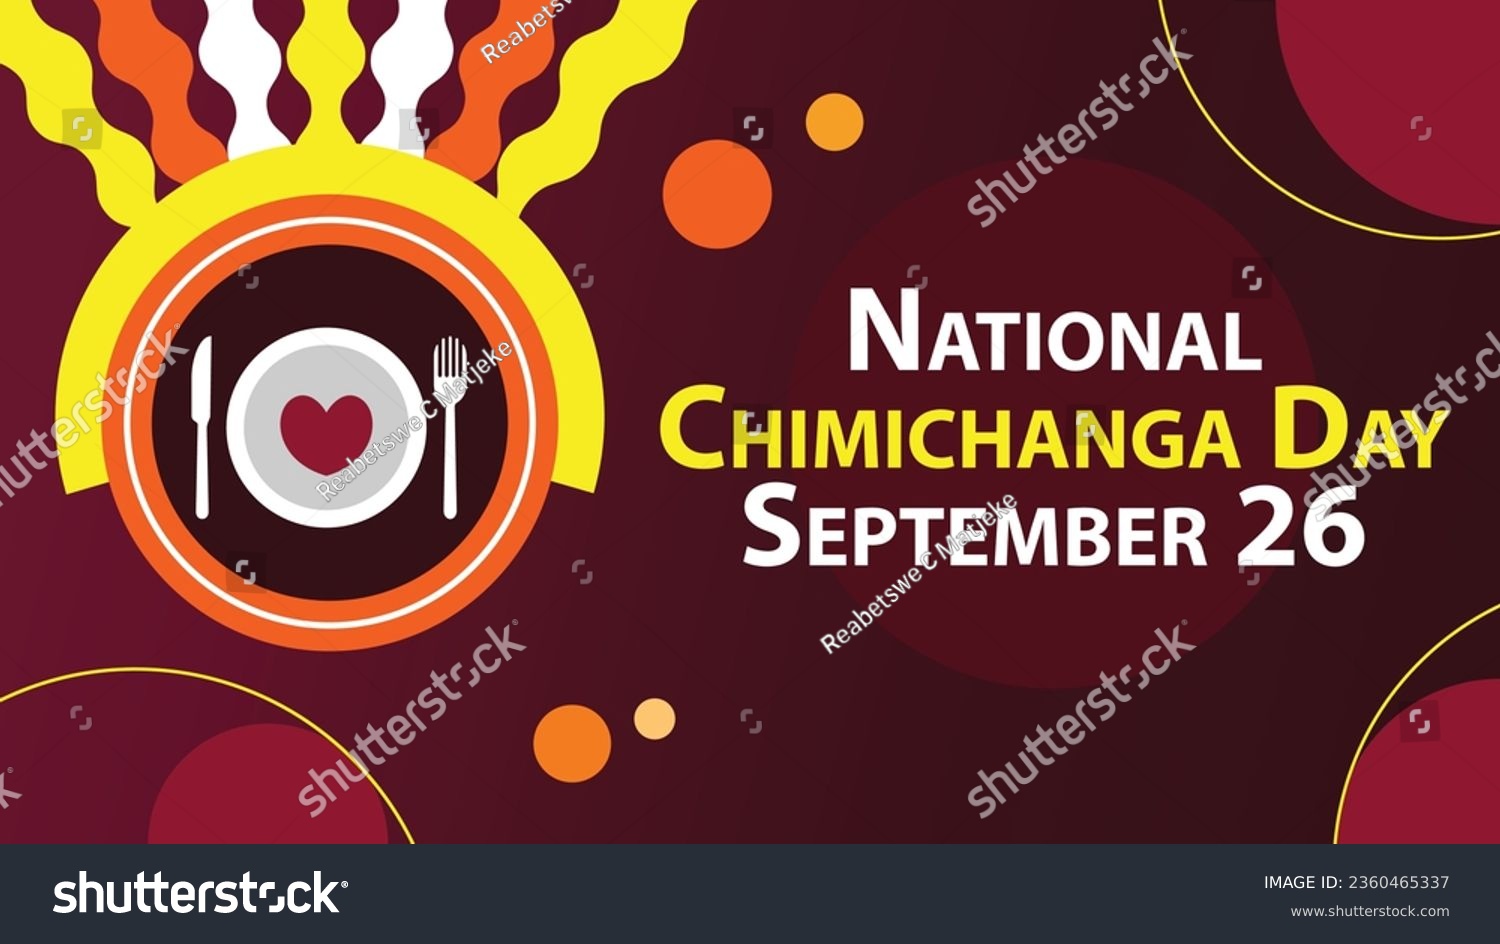 SVG of National Chimichanga Day vector banner design. Happy National Chimichanga Day modern minimal graphic poster illustration. svg